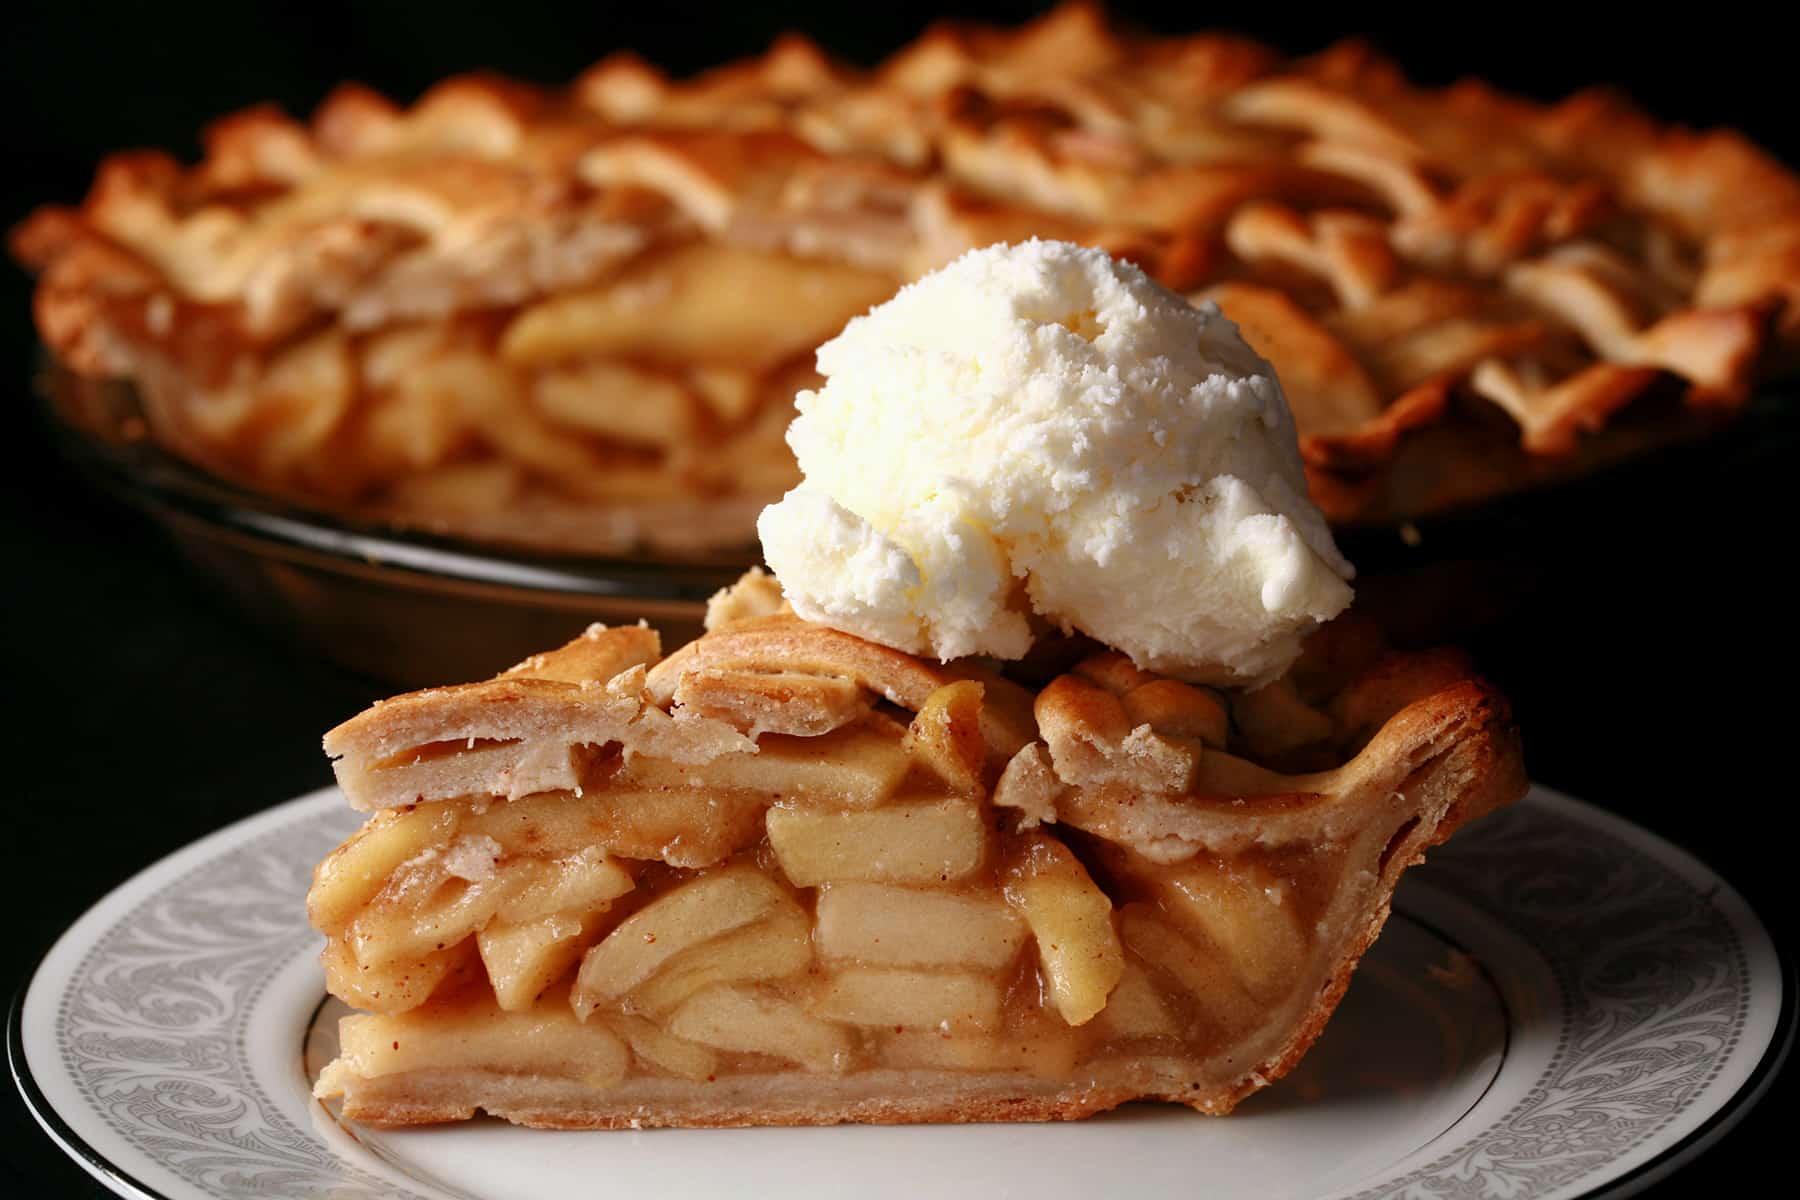 A slice of gluten free apple pie, in front of the whole gluten-free pie.